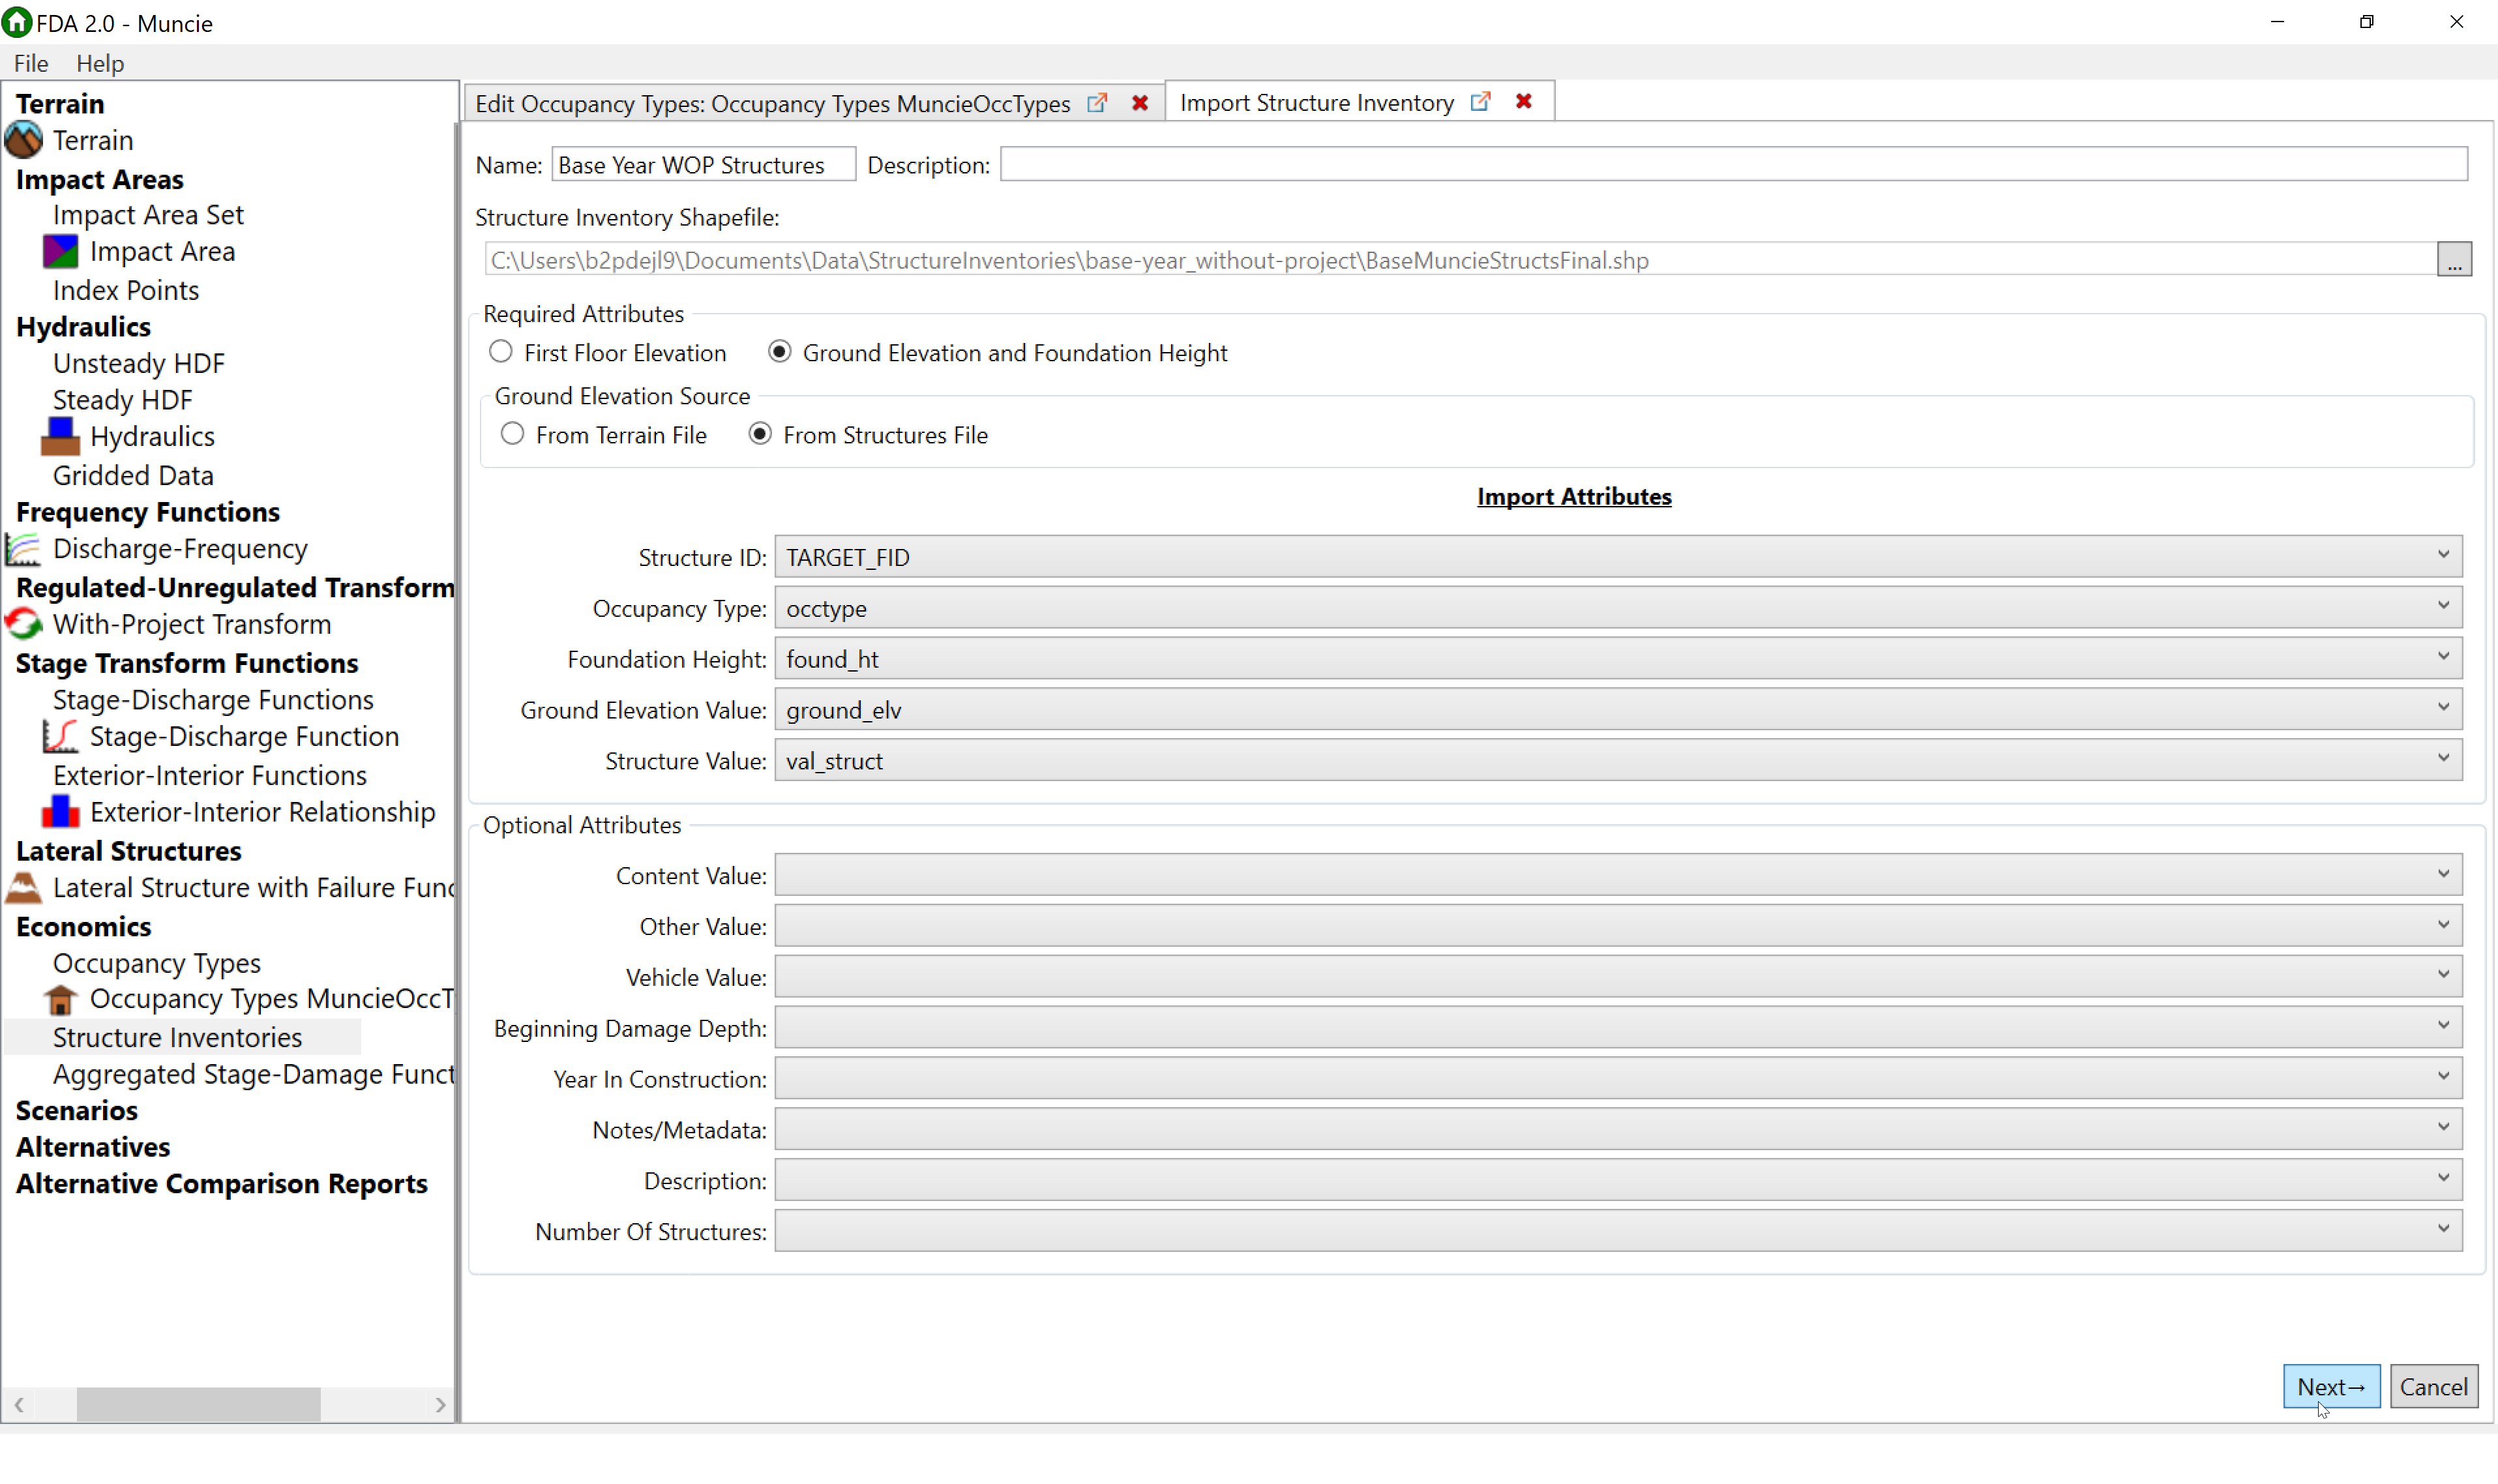 HEC-FDA Version 2.0 Import Structure Inventory Importer Wizard Step 1 Example.